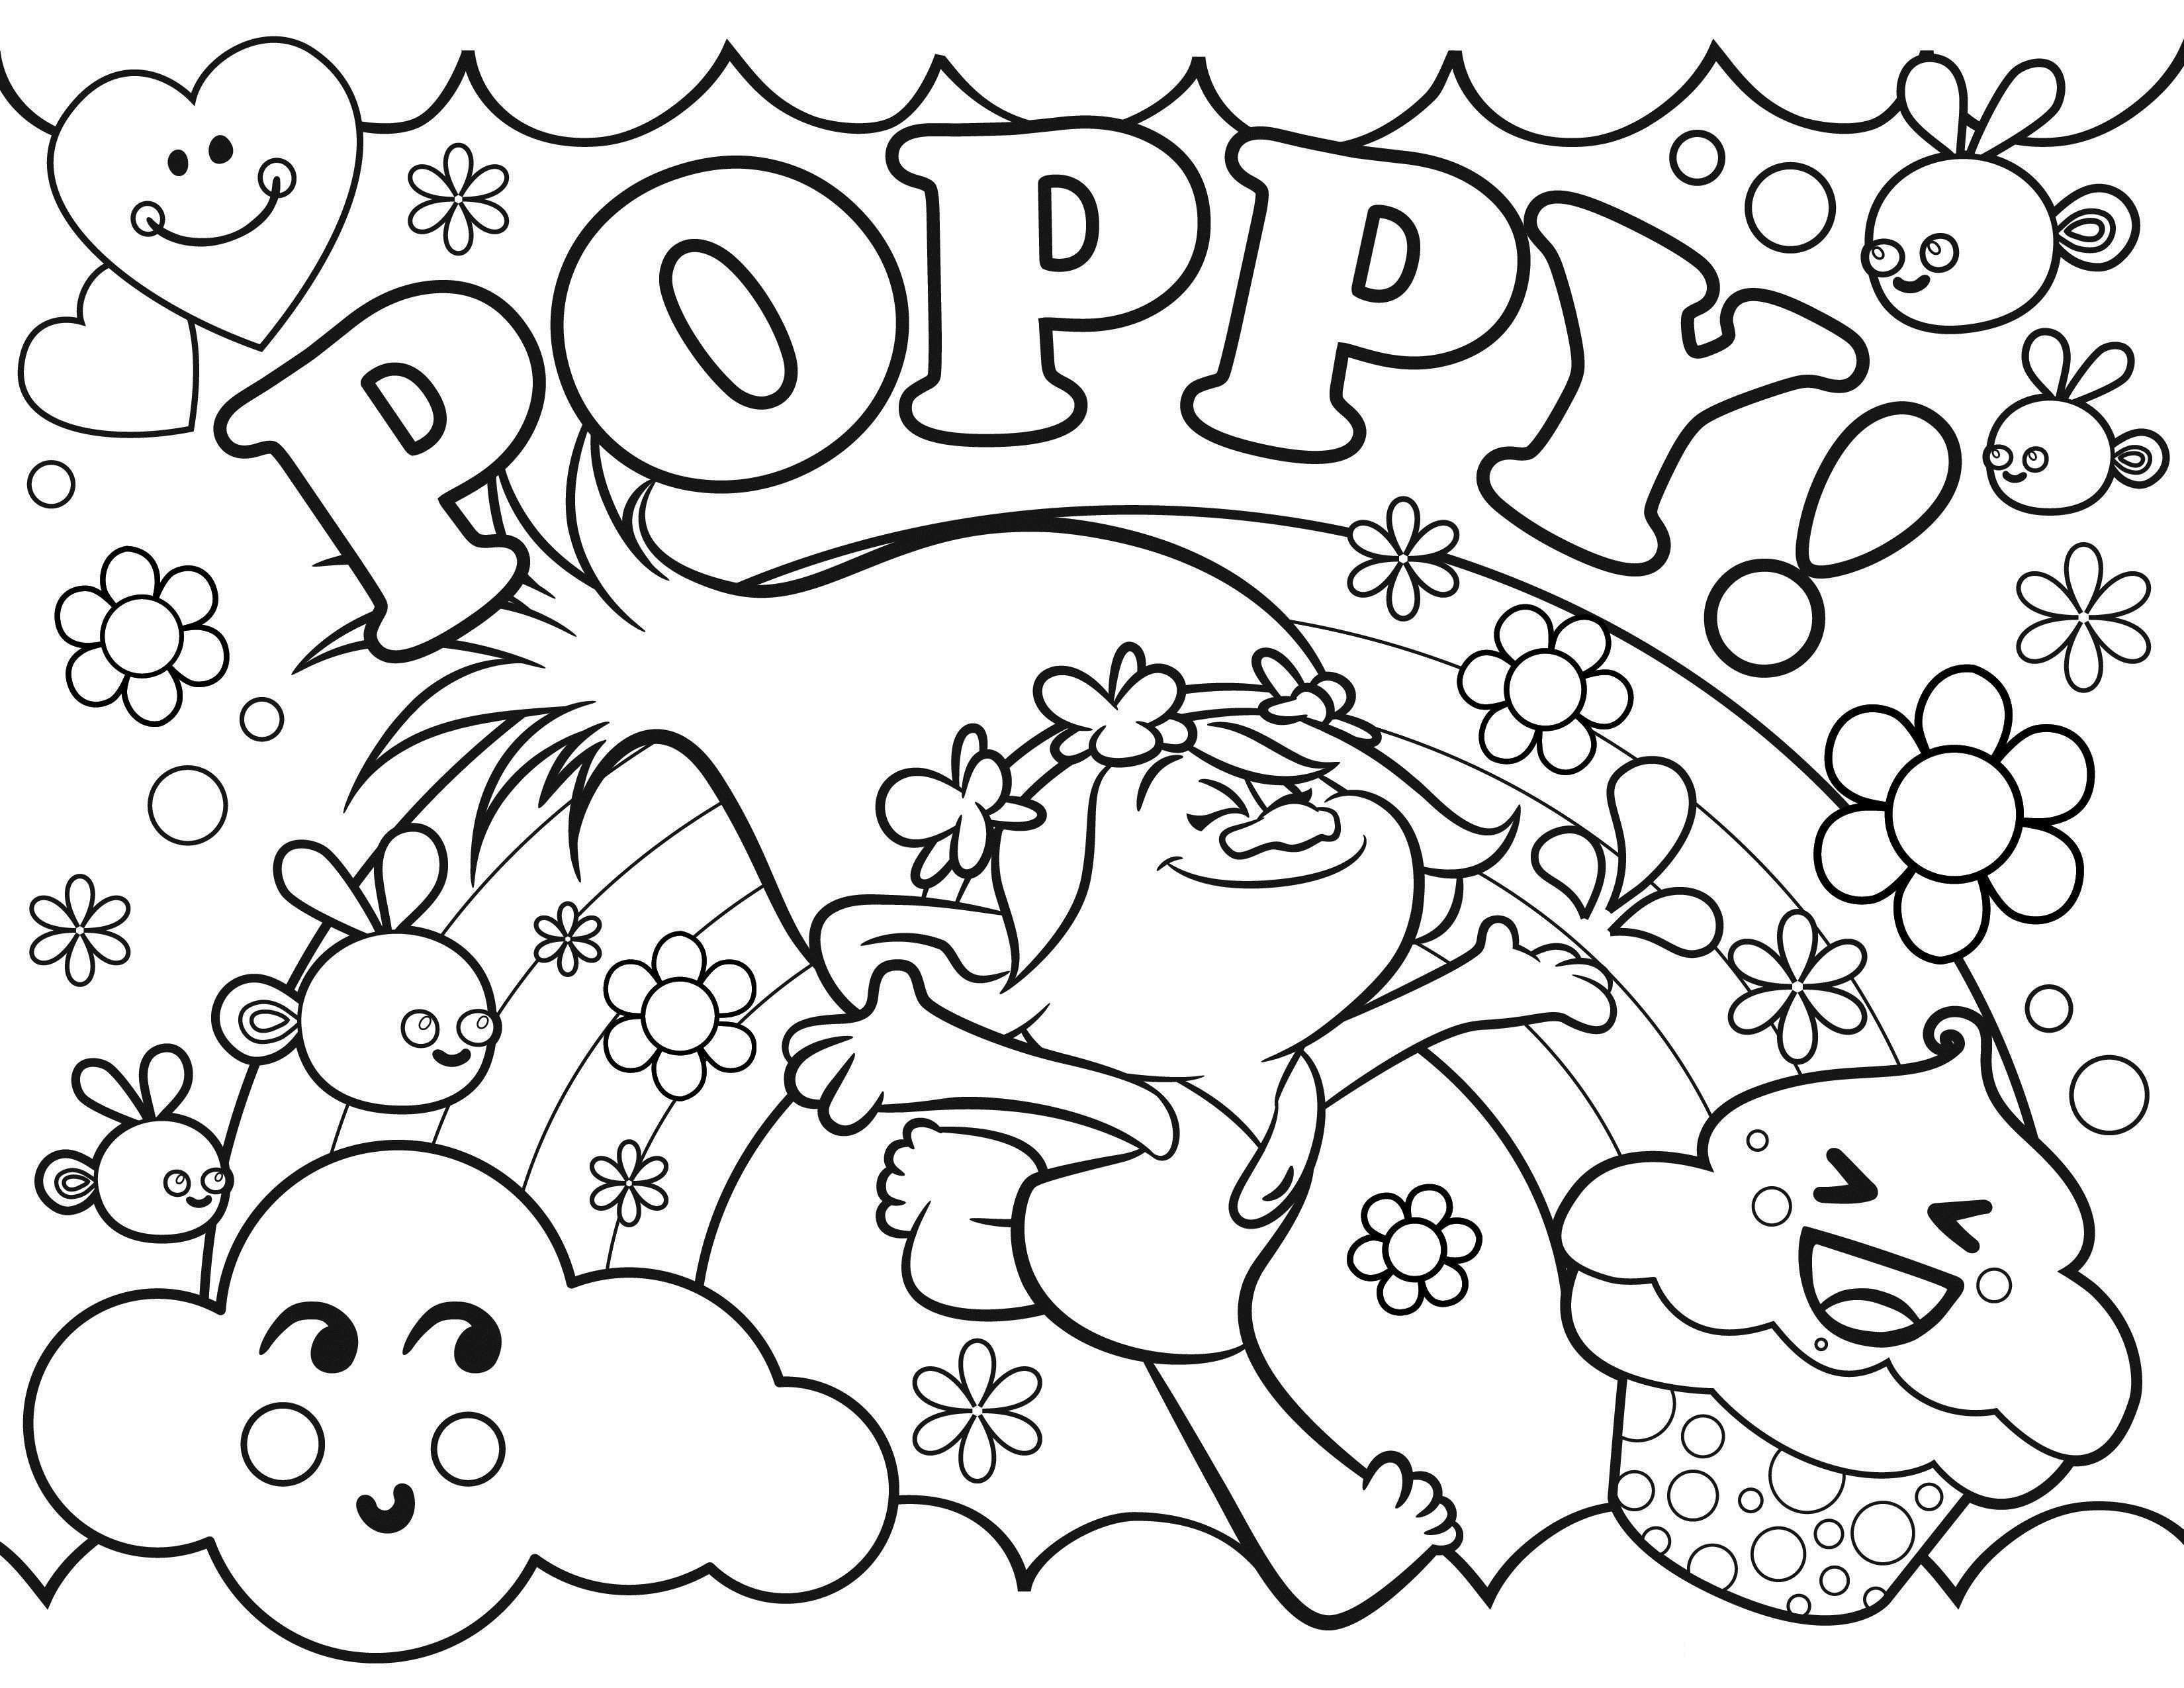 Pin By Marion Vermeer On Trolls Poppy Coloring Page Cartoon Coloring Pages Coloring B